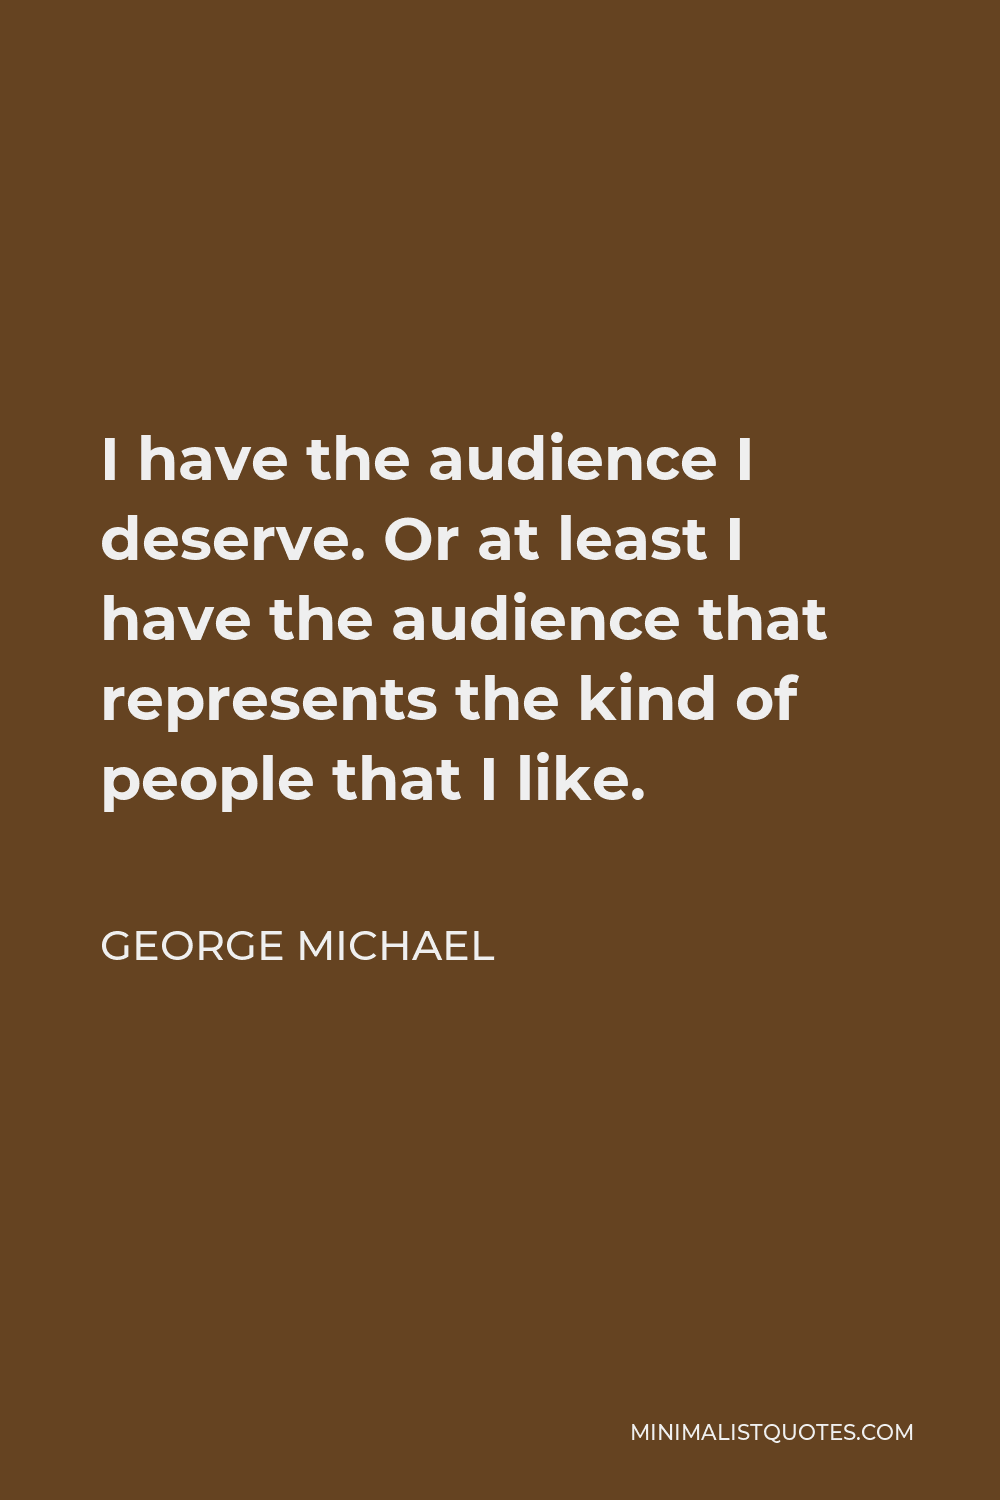 George Michael Quote - I have the audience I deserve. Or at least I have the audience that represents the kind of people that I like.